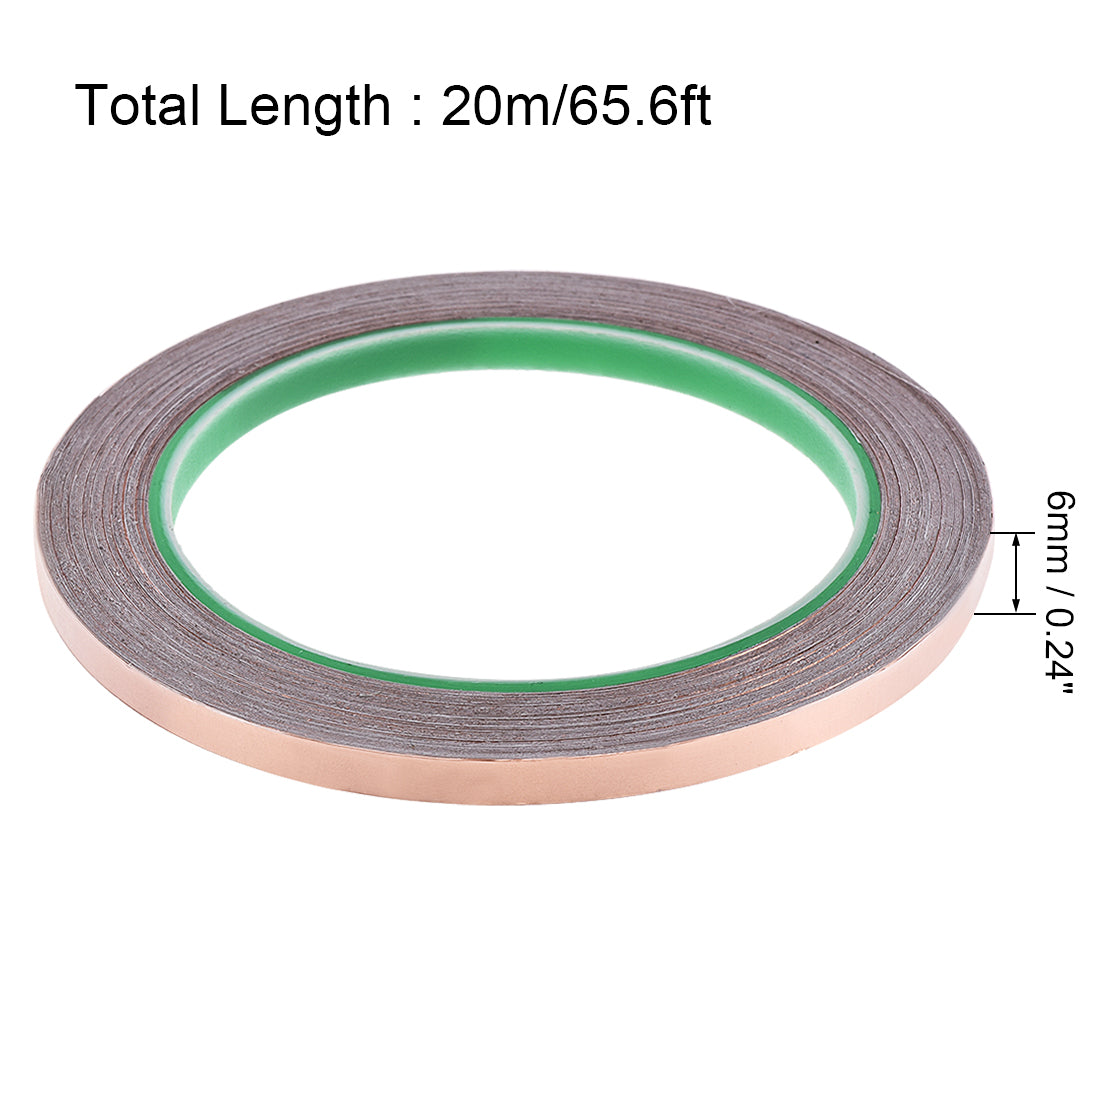 uxcell Uxcell Double Sided Conductive Tape Copper Foil Tape 6mm x 20m/65.6ft for EMI Shielding